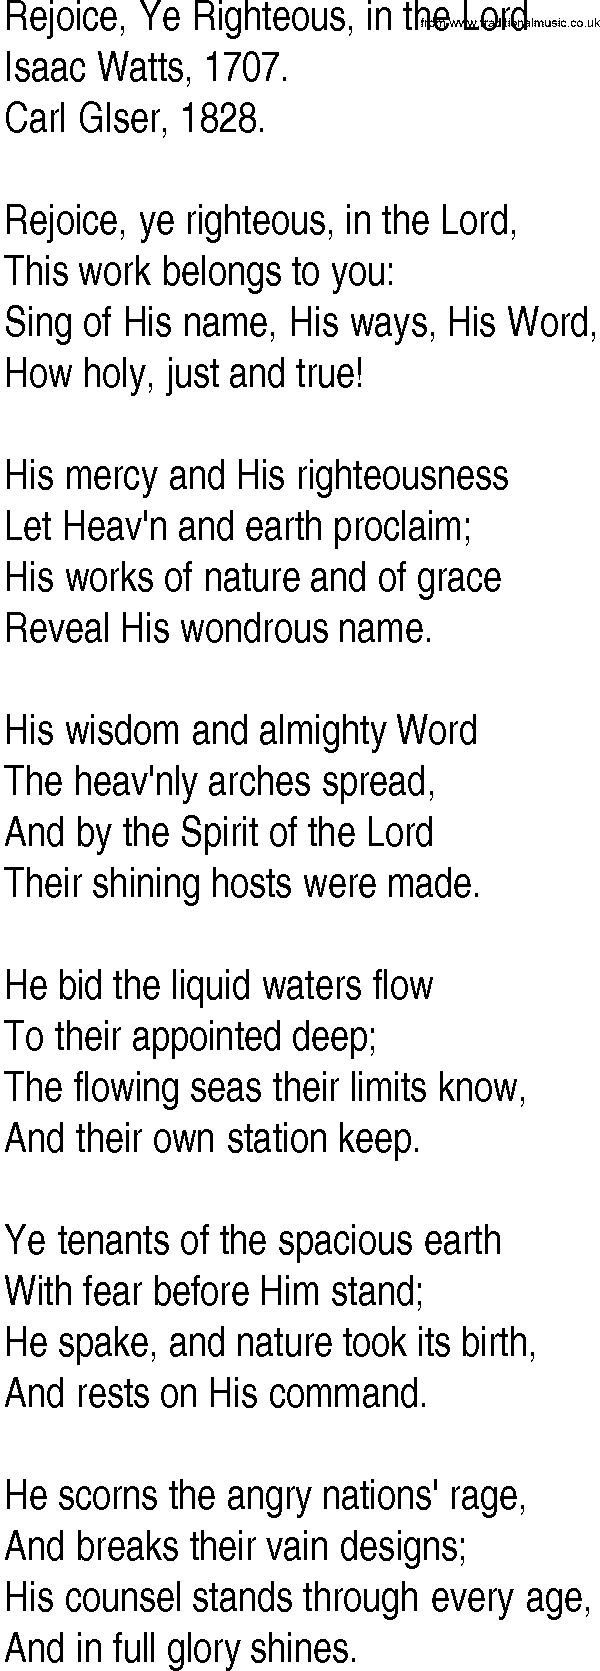 Hymn and Gospel Song: Rejoice, Ye Righteous, in the Lord by Isaac Watts lyrics